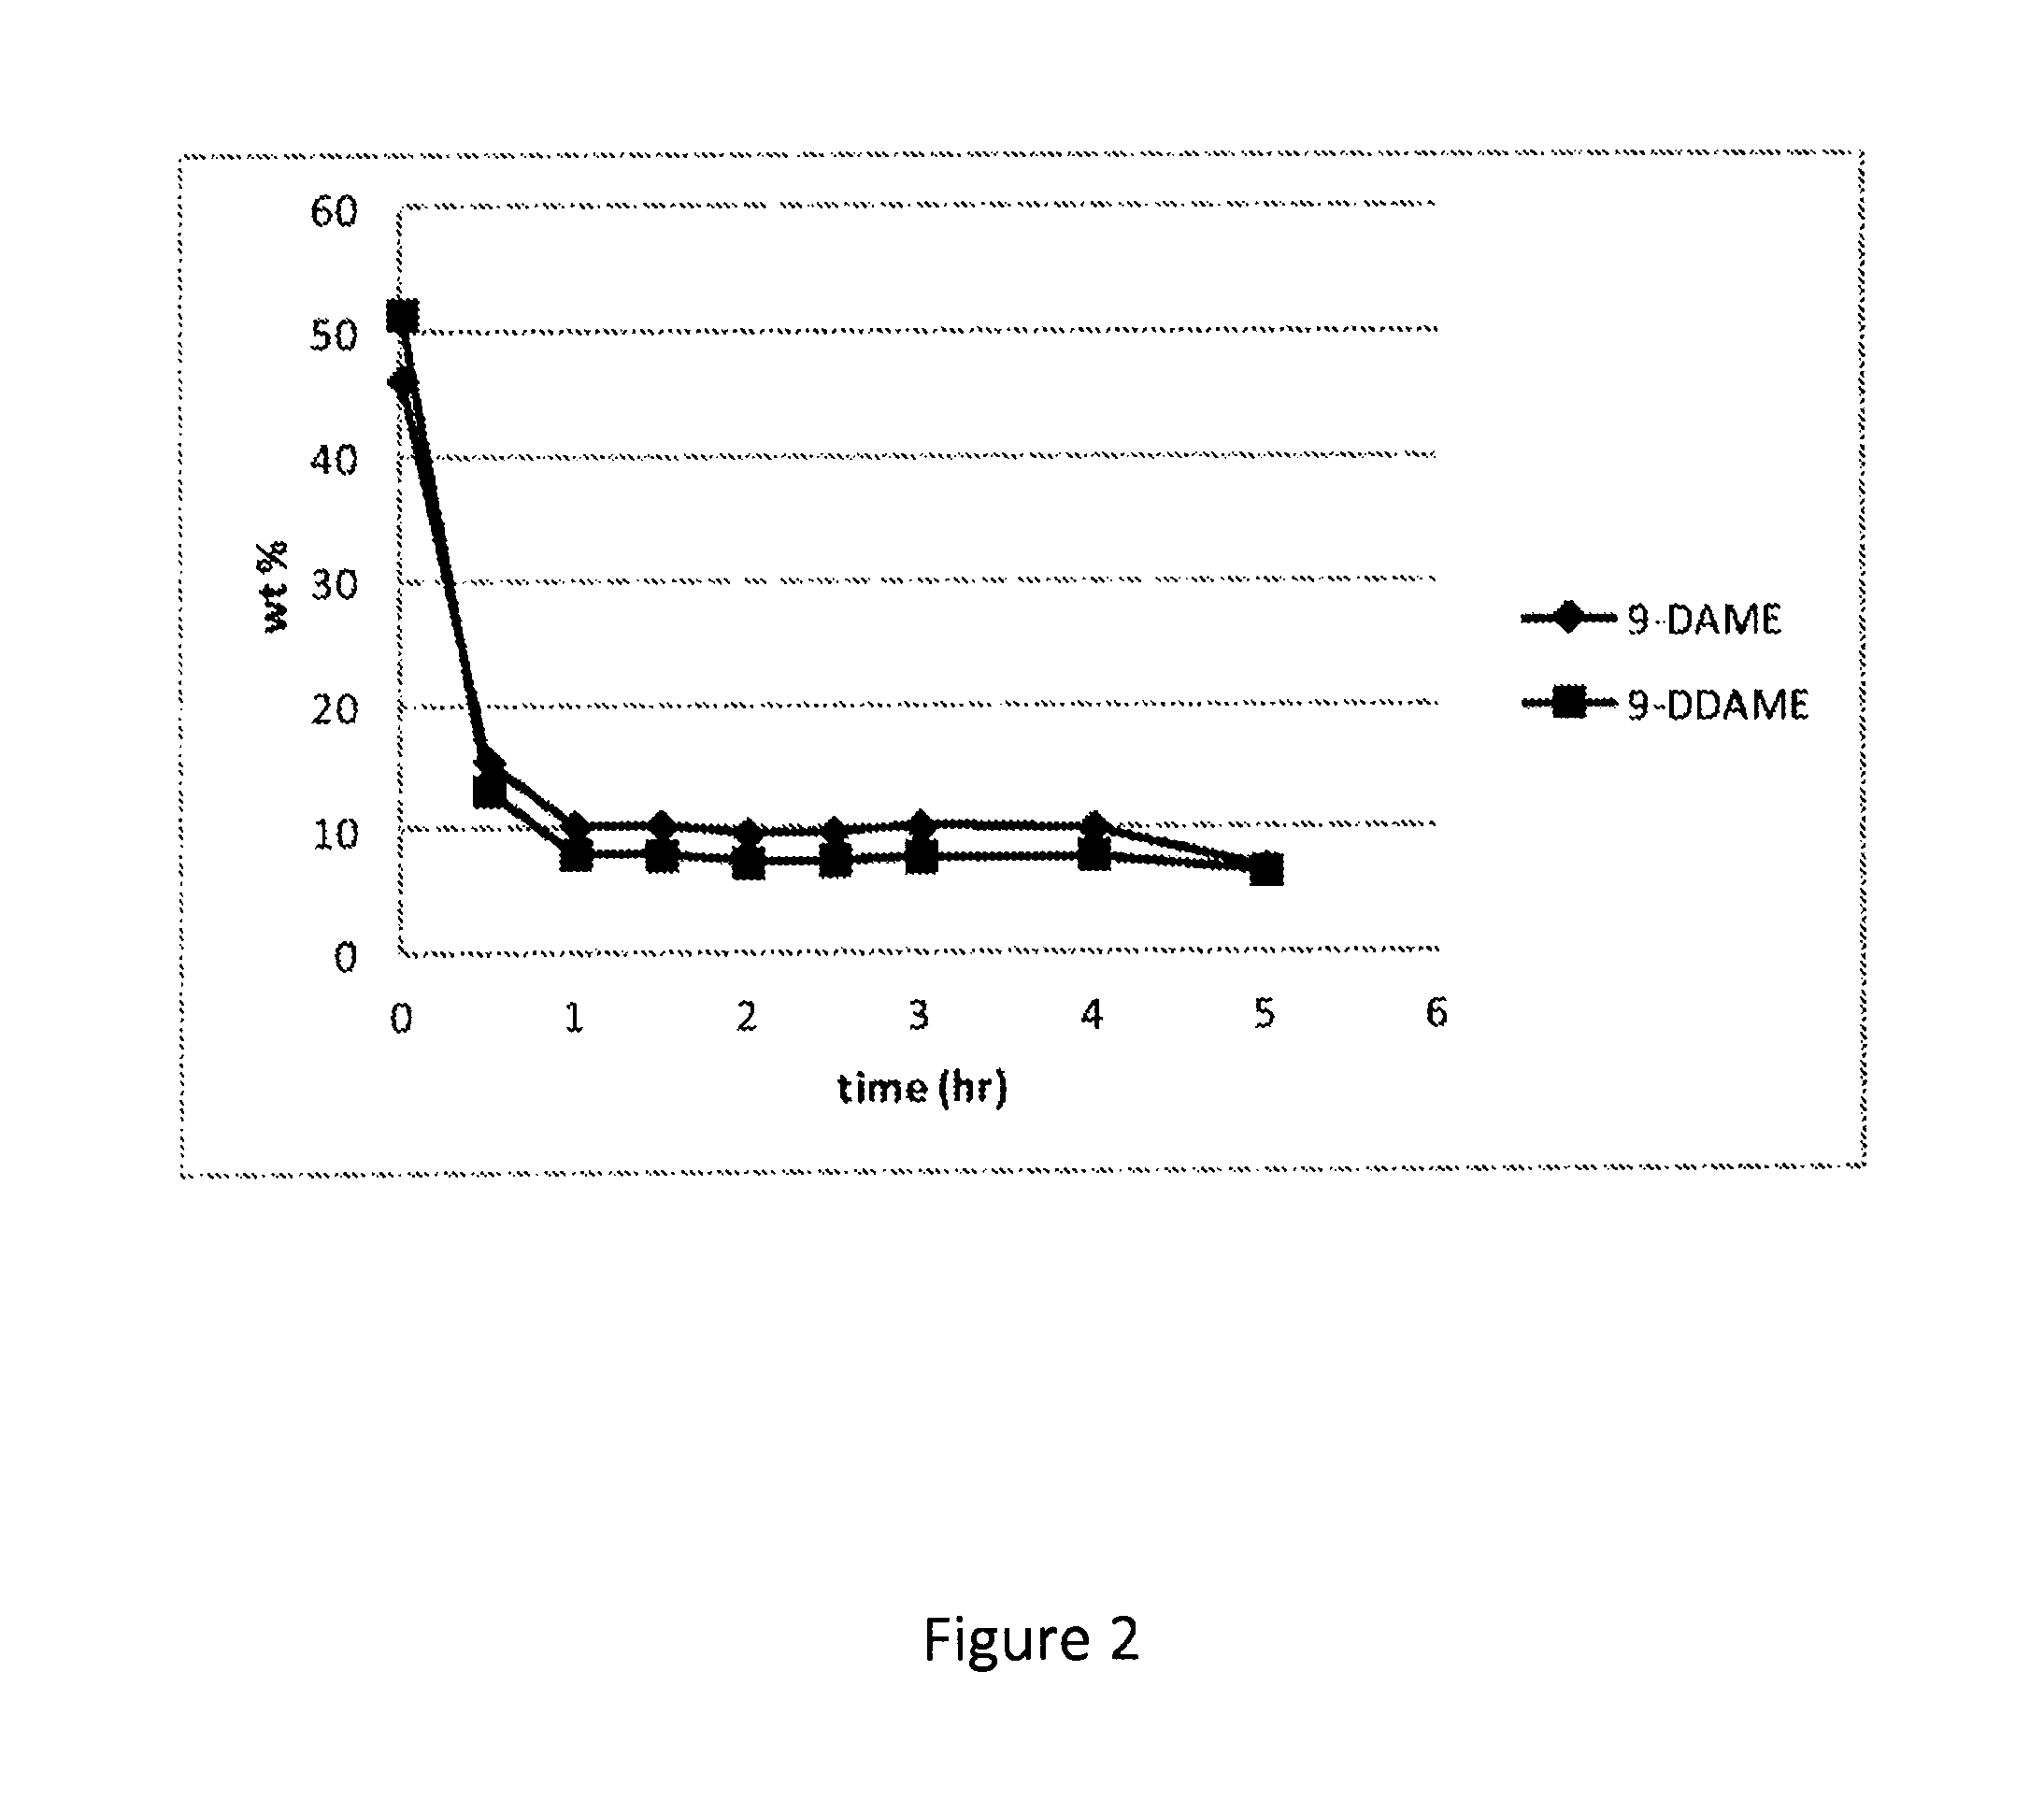 Methods of refining and producing fuel and specialty chemicals from natural oil feedstocks